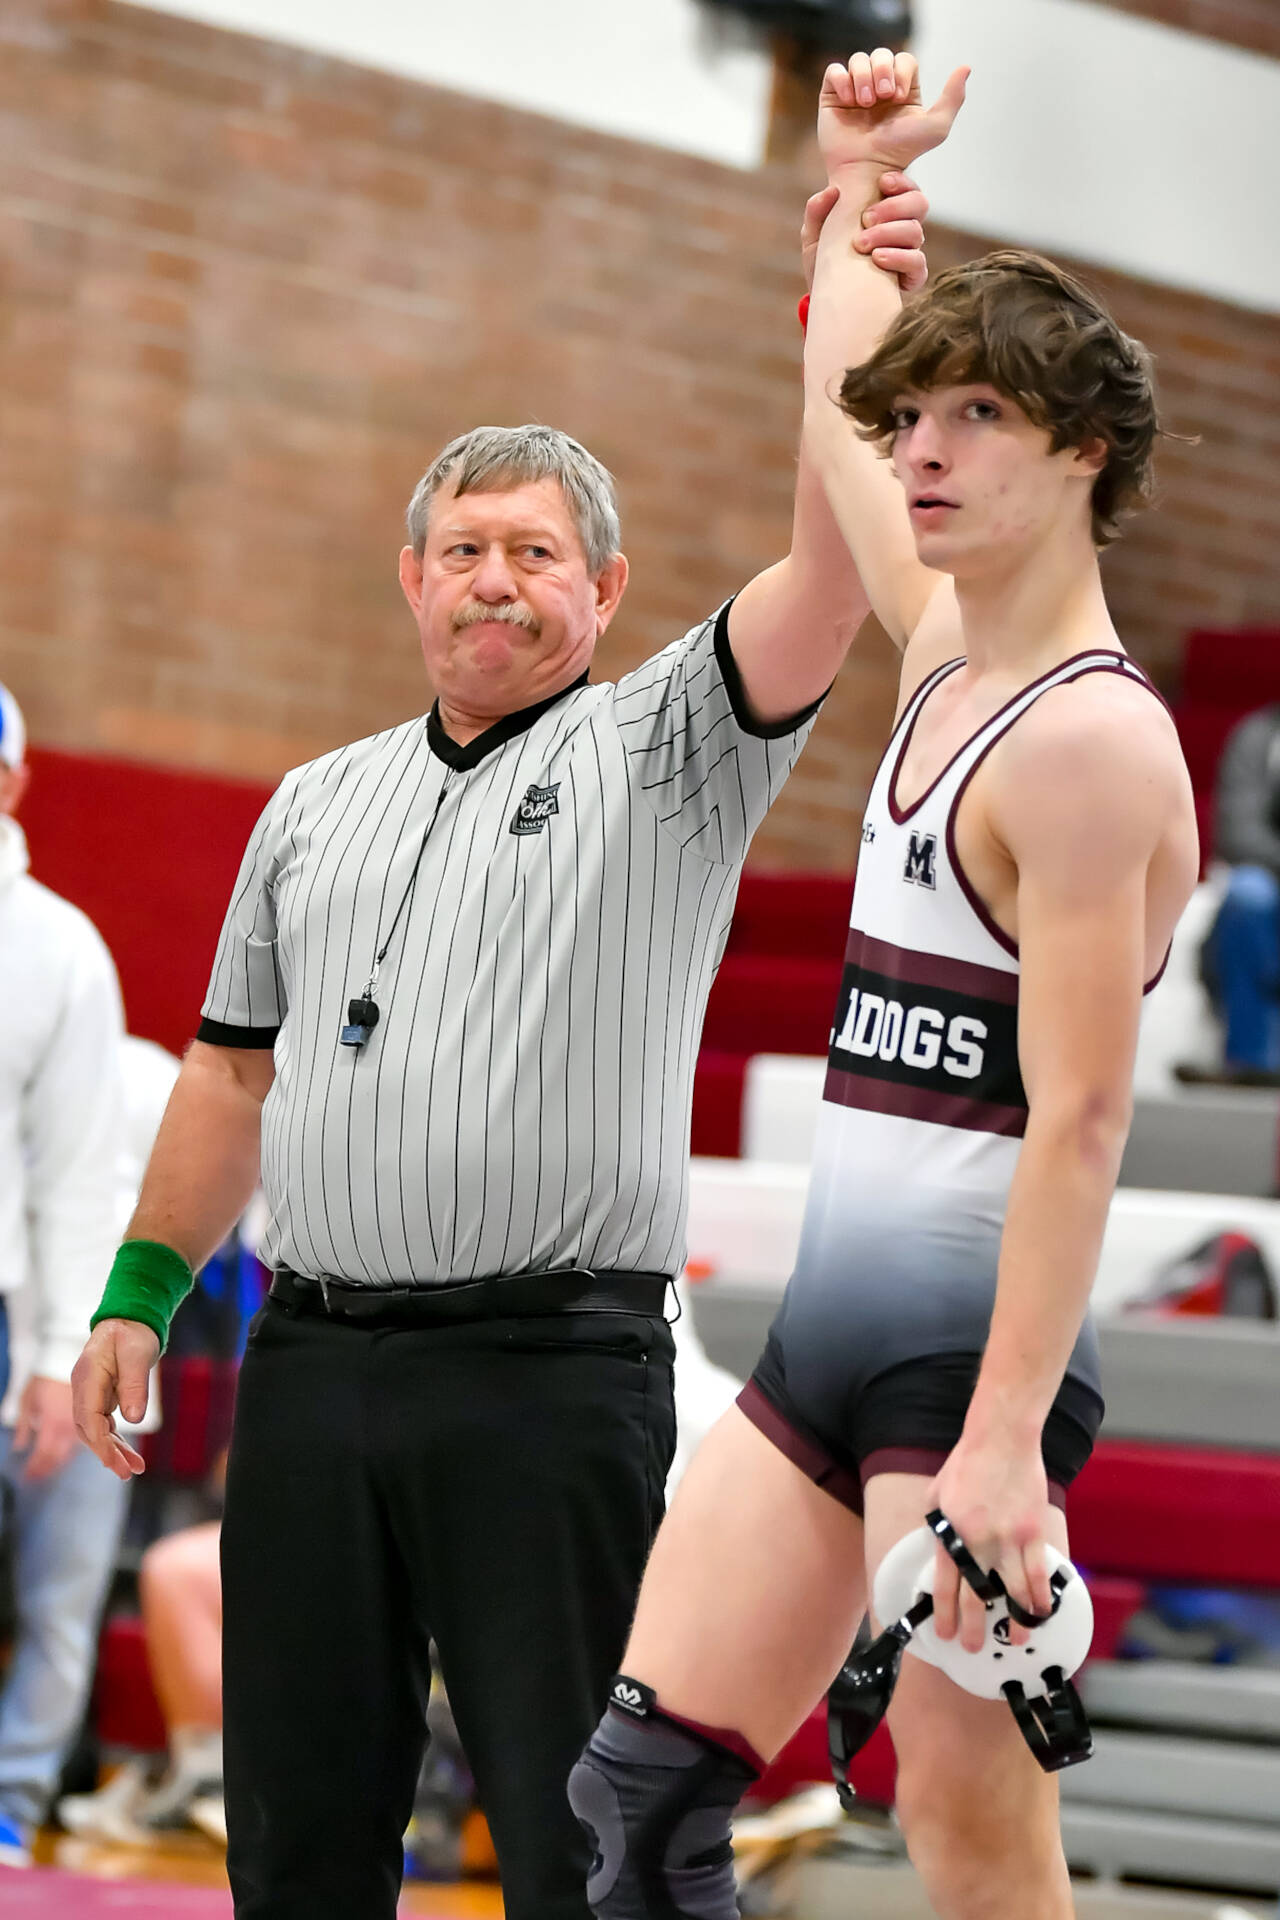 JIM THRALL | MATFOCUS.COM A familiar sight for Montesano wrestling fans, Bulldogs senior Cole Ekerson has his hand raised after winning a match at a 1A Evergreen League duals meet on Saturday in Montesano. Ekerson would record his 100th victory at the meet.